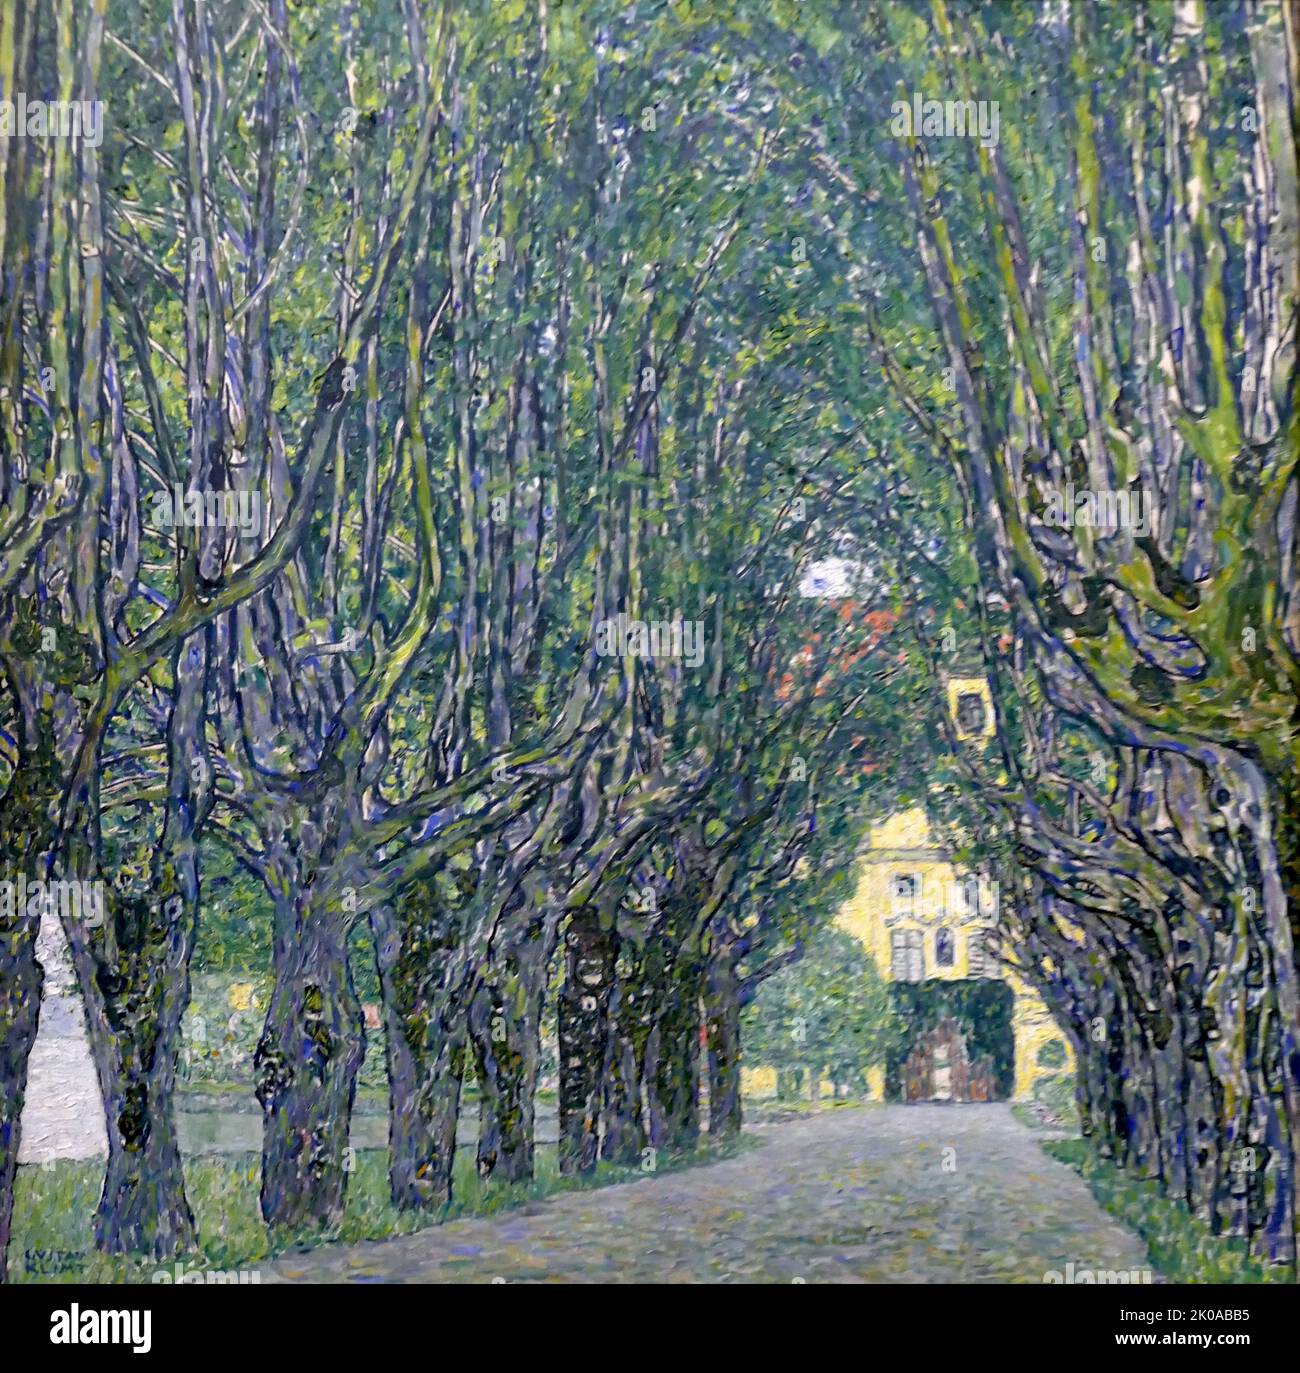 Avenue to Schloss Kammer, 1912, by Gustav Klimt. Gustav Klimt (July 14, 1862 - February 6, 1918) was an Austrian symbolist painter and one of the most prominent members of the Vienna Secession movement. Klimt is noted for his paintings, murals, sketches, and other objets d'art Stock Photo